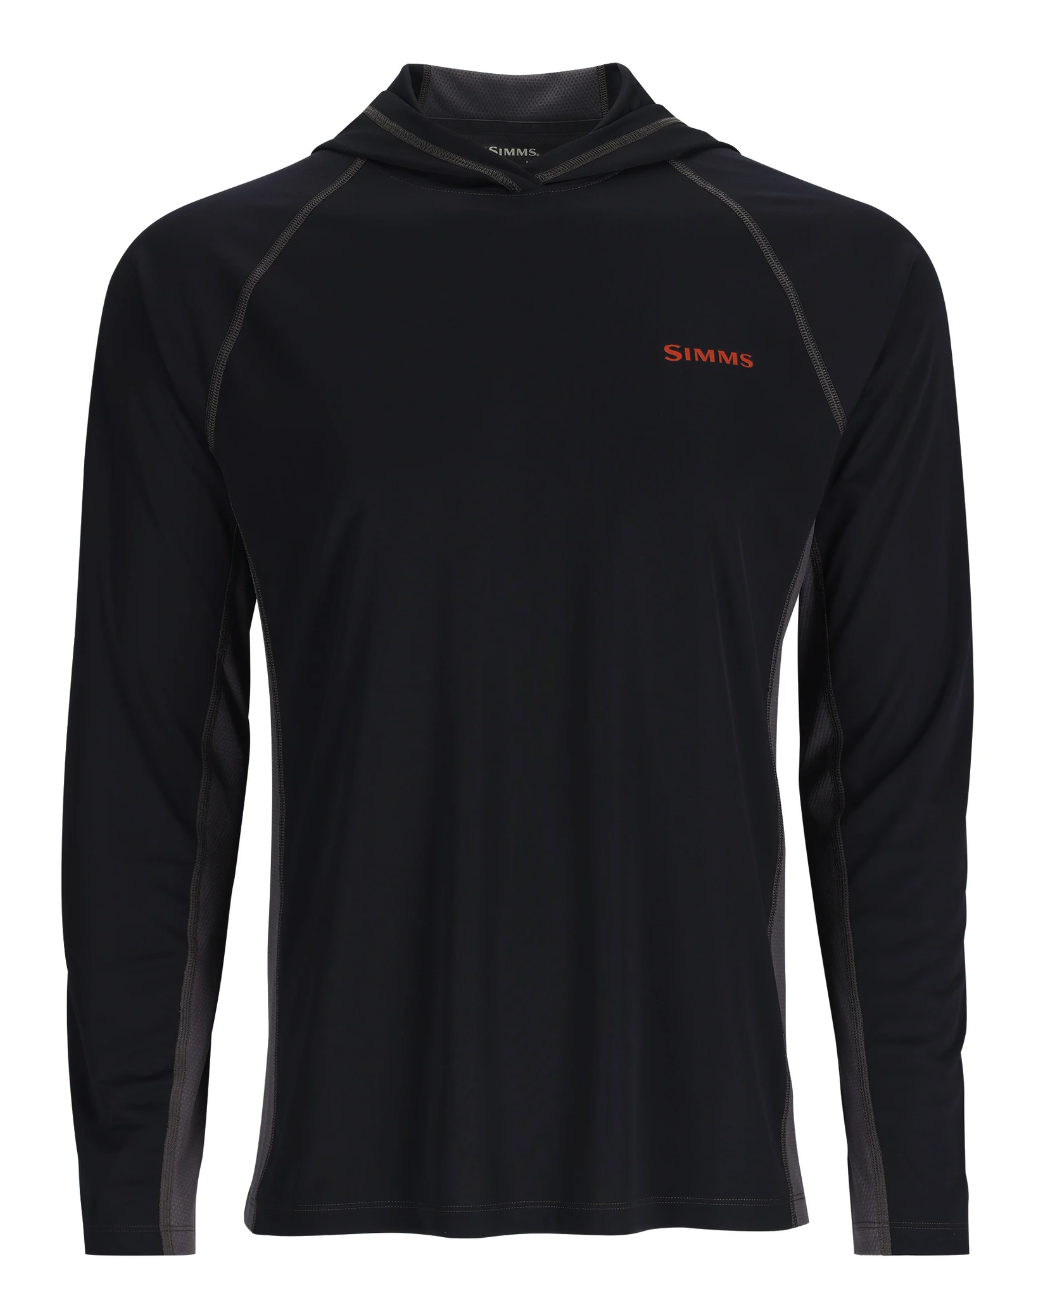 Simms Challenger Solar Hoody for sale online is a super comfortable UPF rated fishing sun protection shirt.